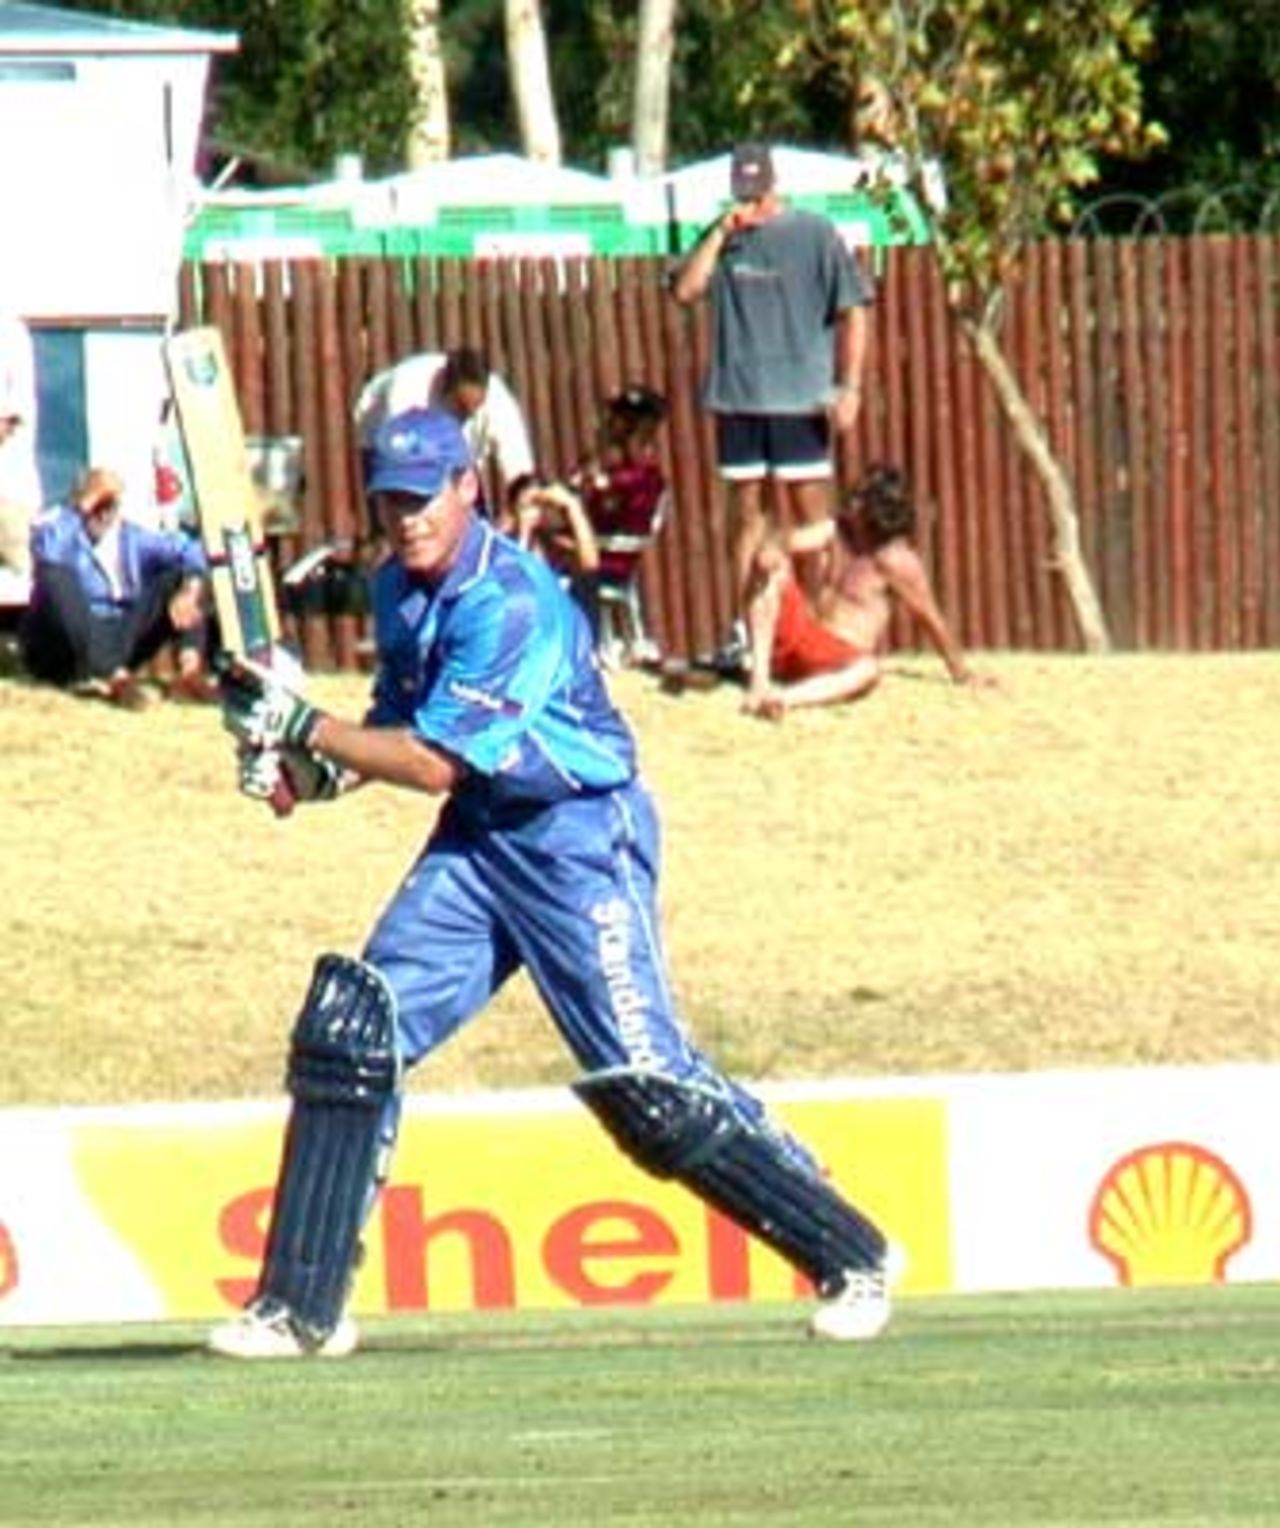 WP's Neil Johnson plays a ball into the covers against Boland a Standard Bank Cup match at Paarl on Friday